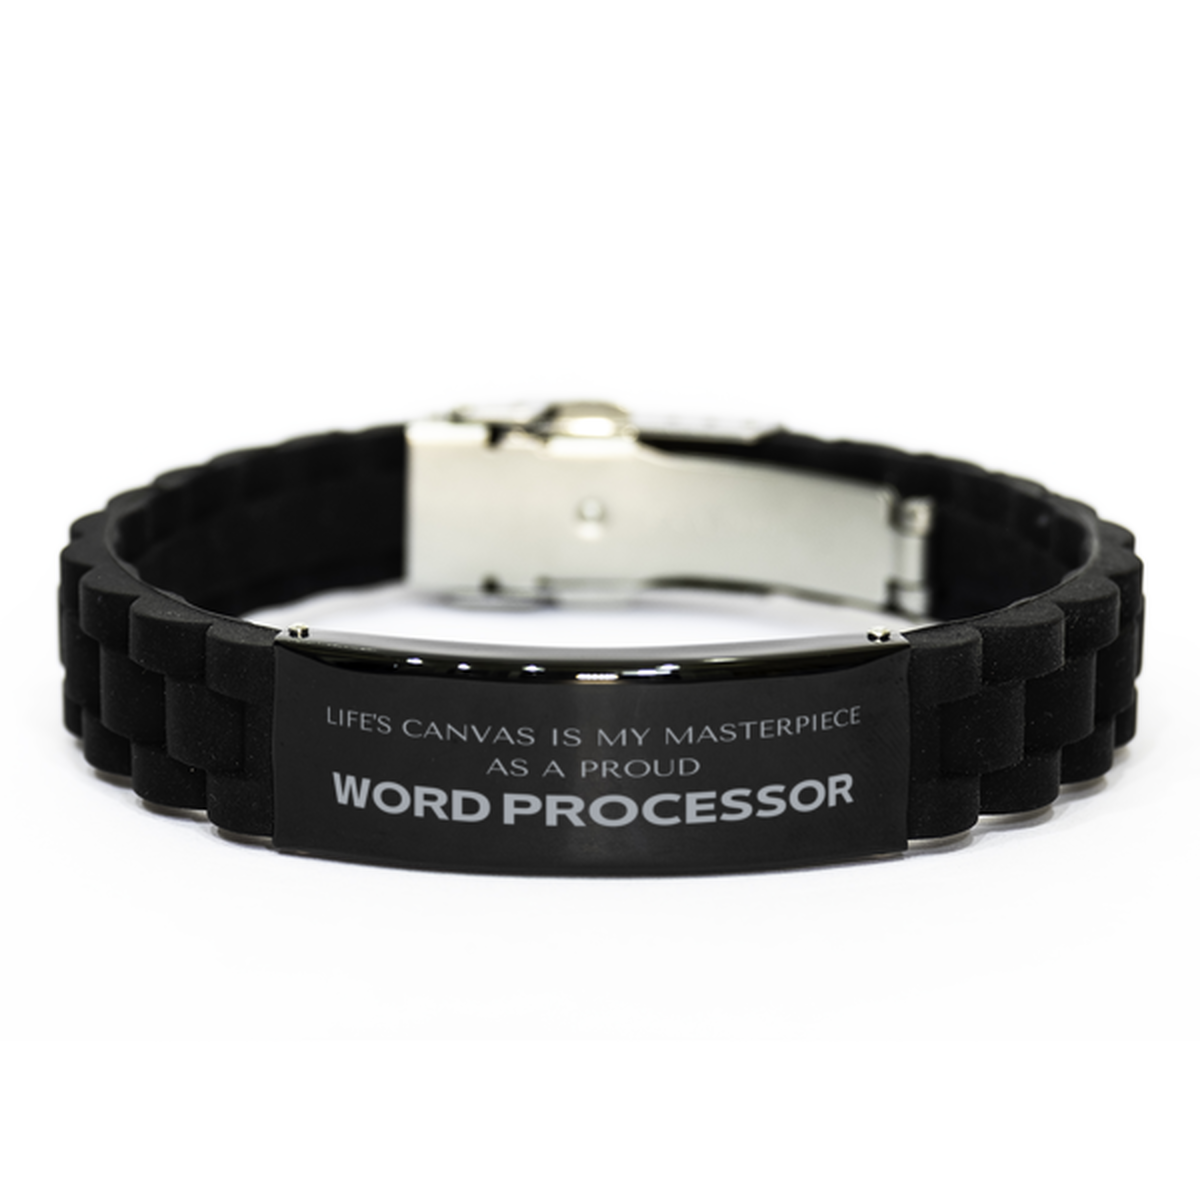 Proud Word Processor Gifts, Life's canvas is my masterpiece, Epic Birthday Christmas Unique Black Glidelock Clasp Bracelet For Word Processor, Coworkers, Men, Women, Friends